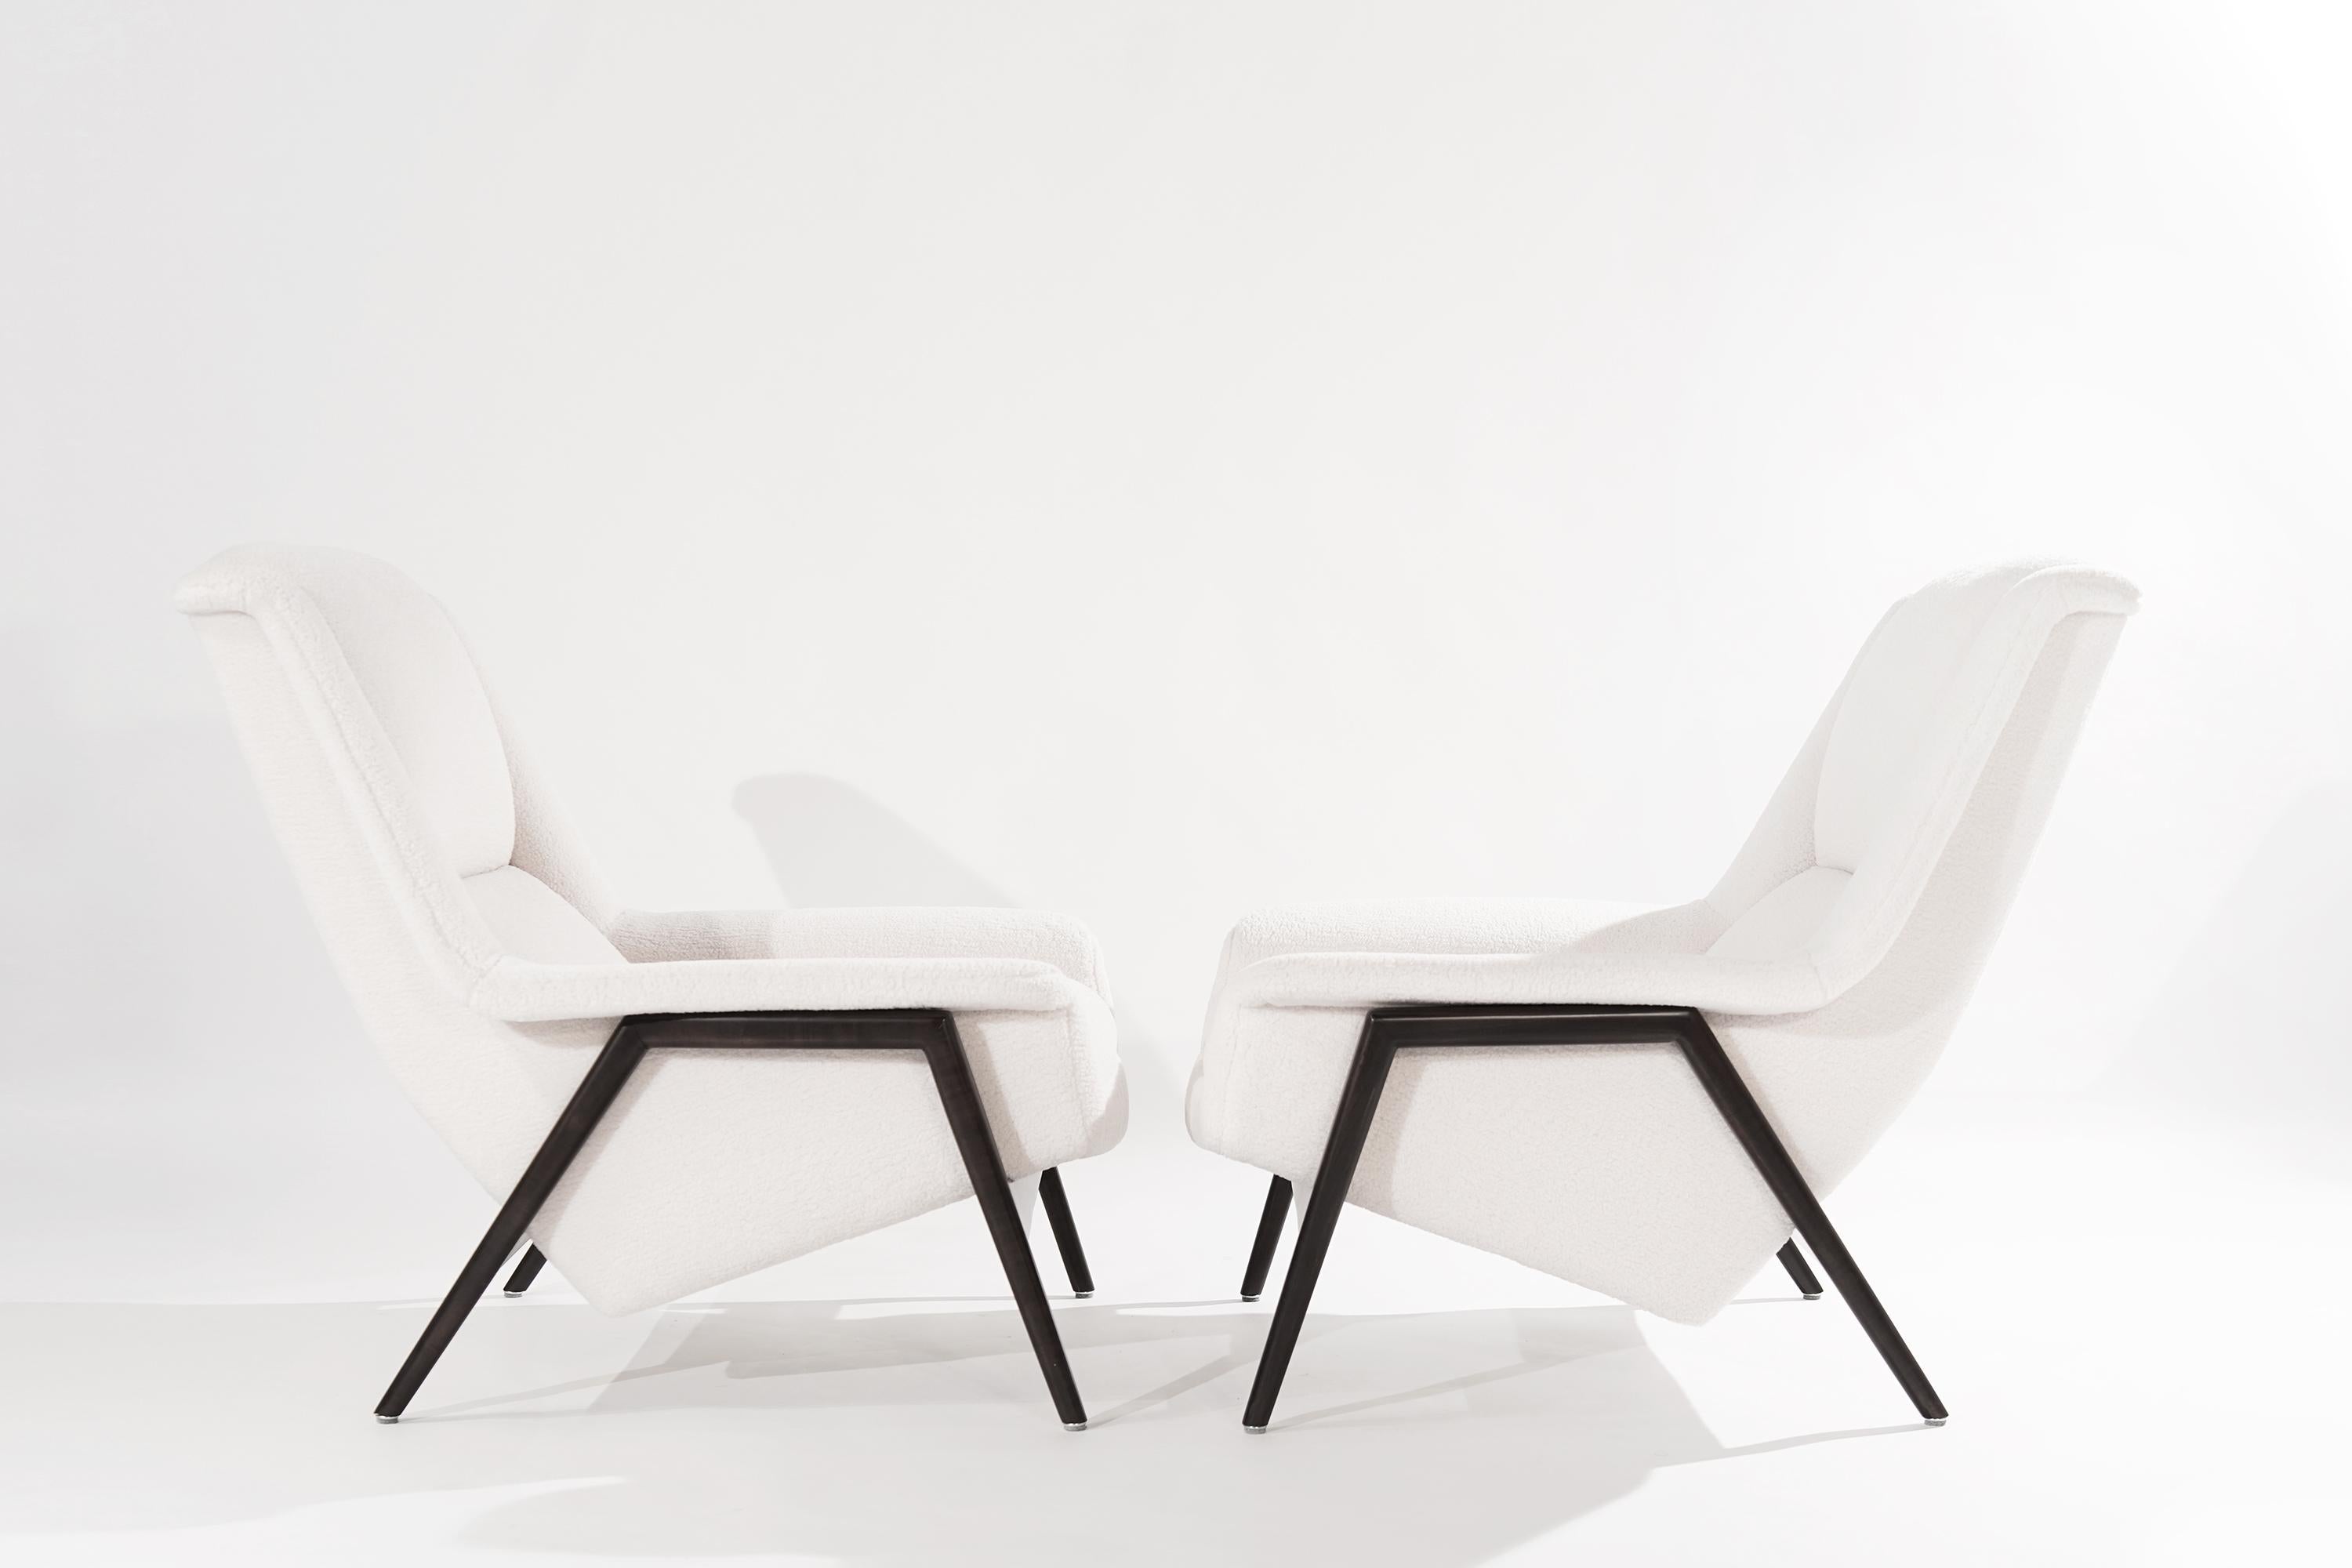 Stunning pair of large profile Scandinavian-Modern lounge chairs designed by Folke Ohlsson for DUX of Sweden, circa 1960s.

Signature teak frames have been fully restored and ebonized rendering the perfect contrast to their new off-white wool